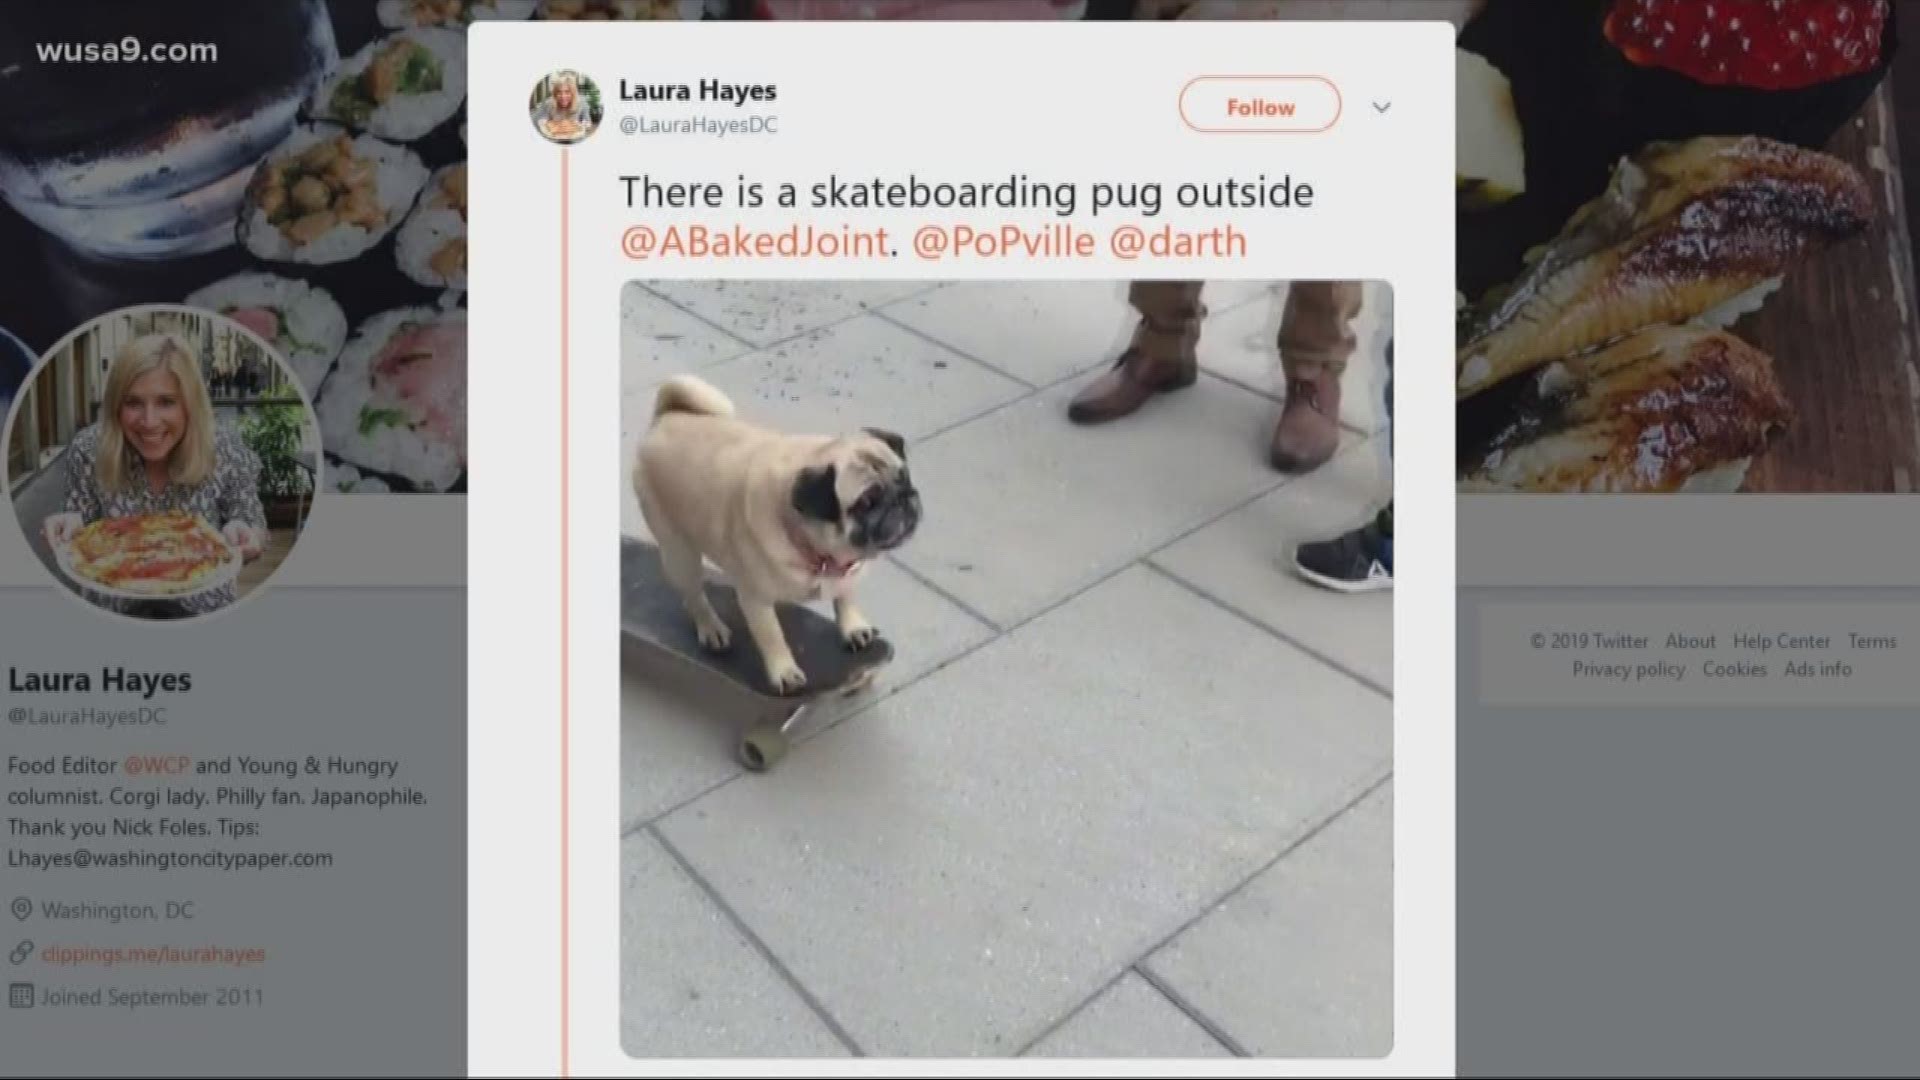 How awesome! This Pug knows how to skateboard. Only in DC would you see something like that.